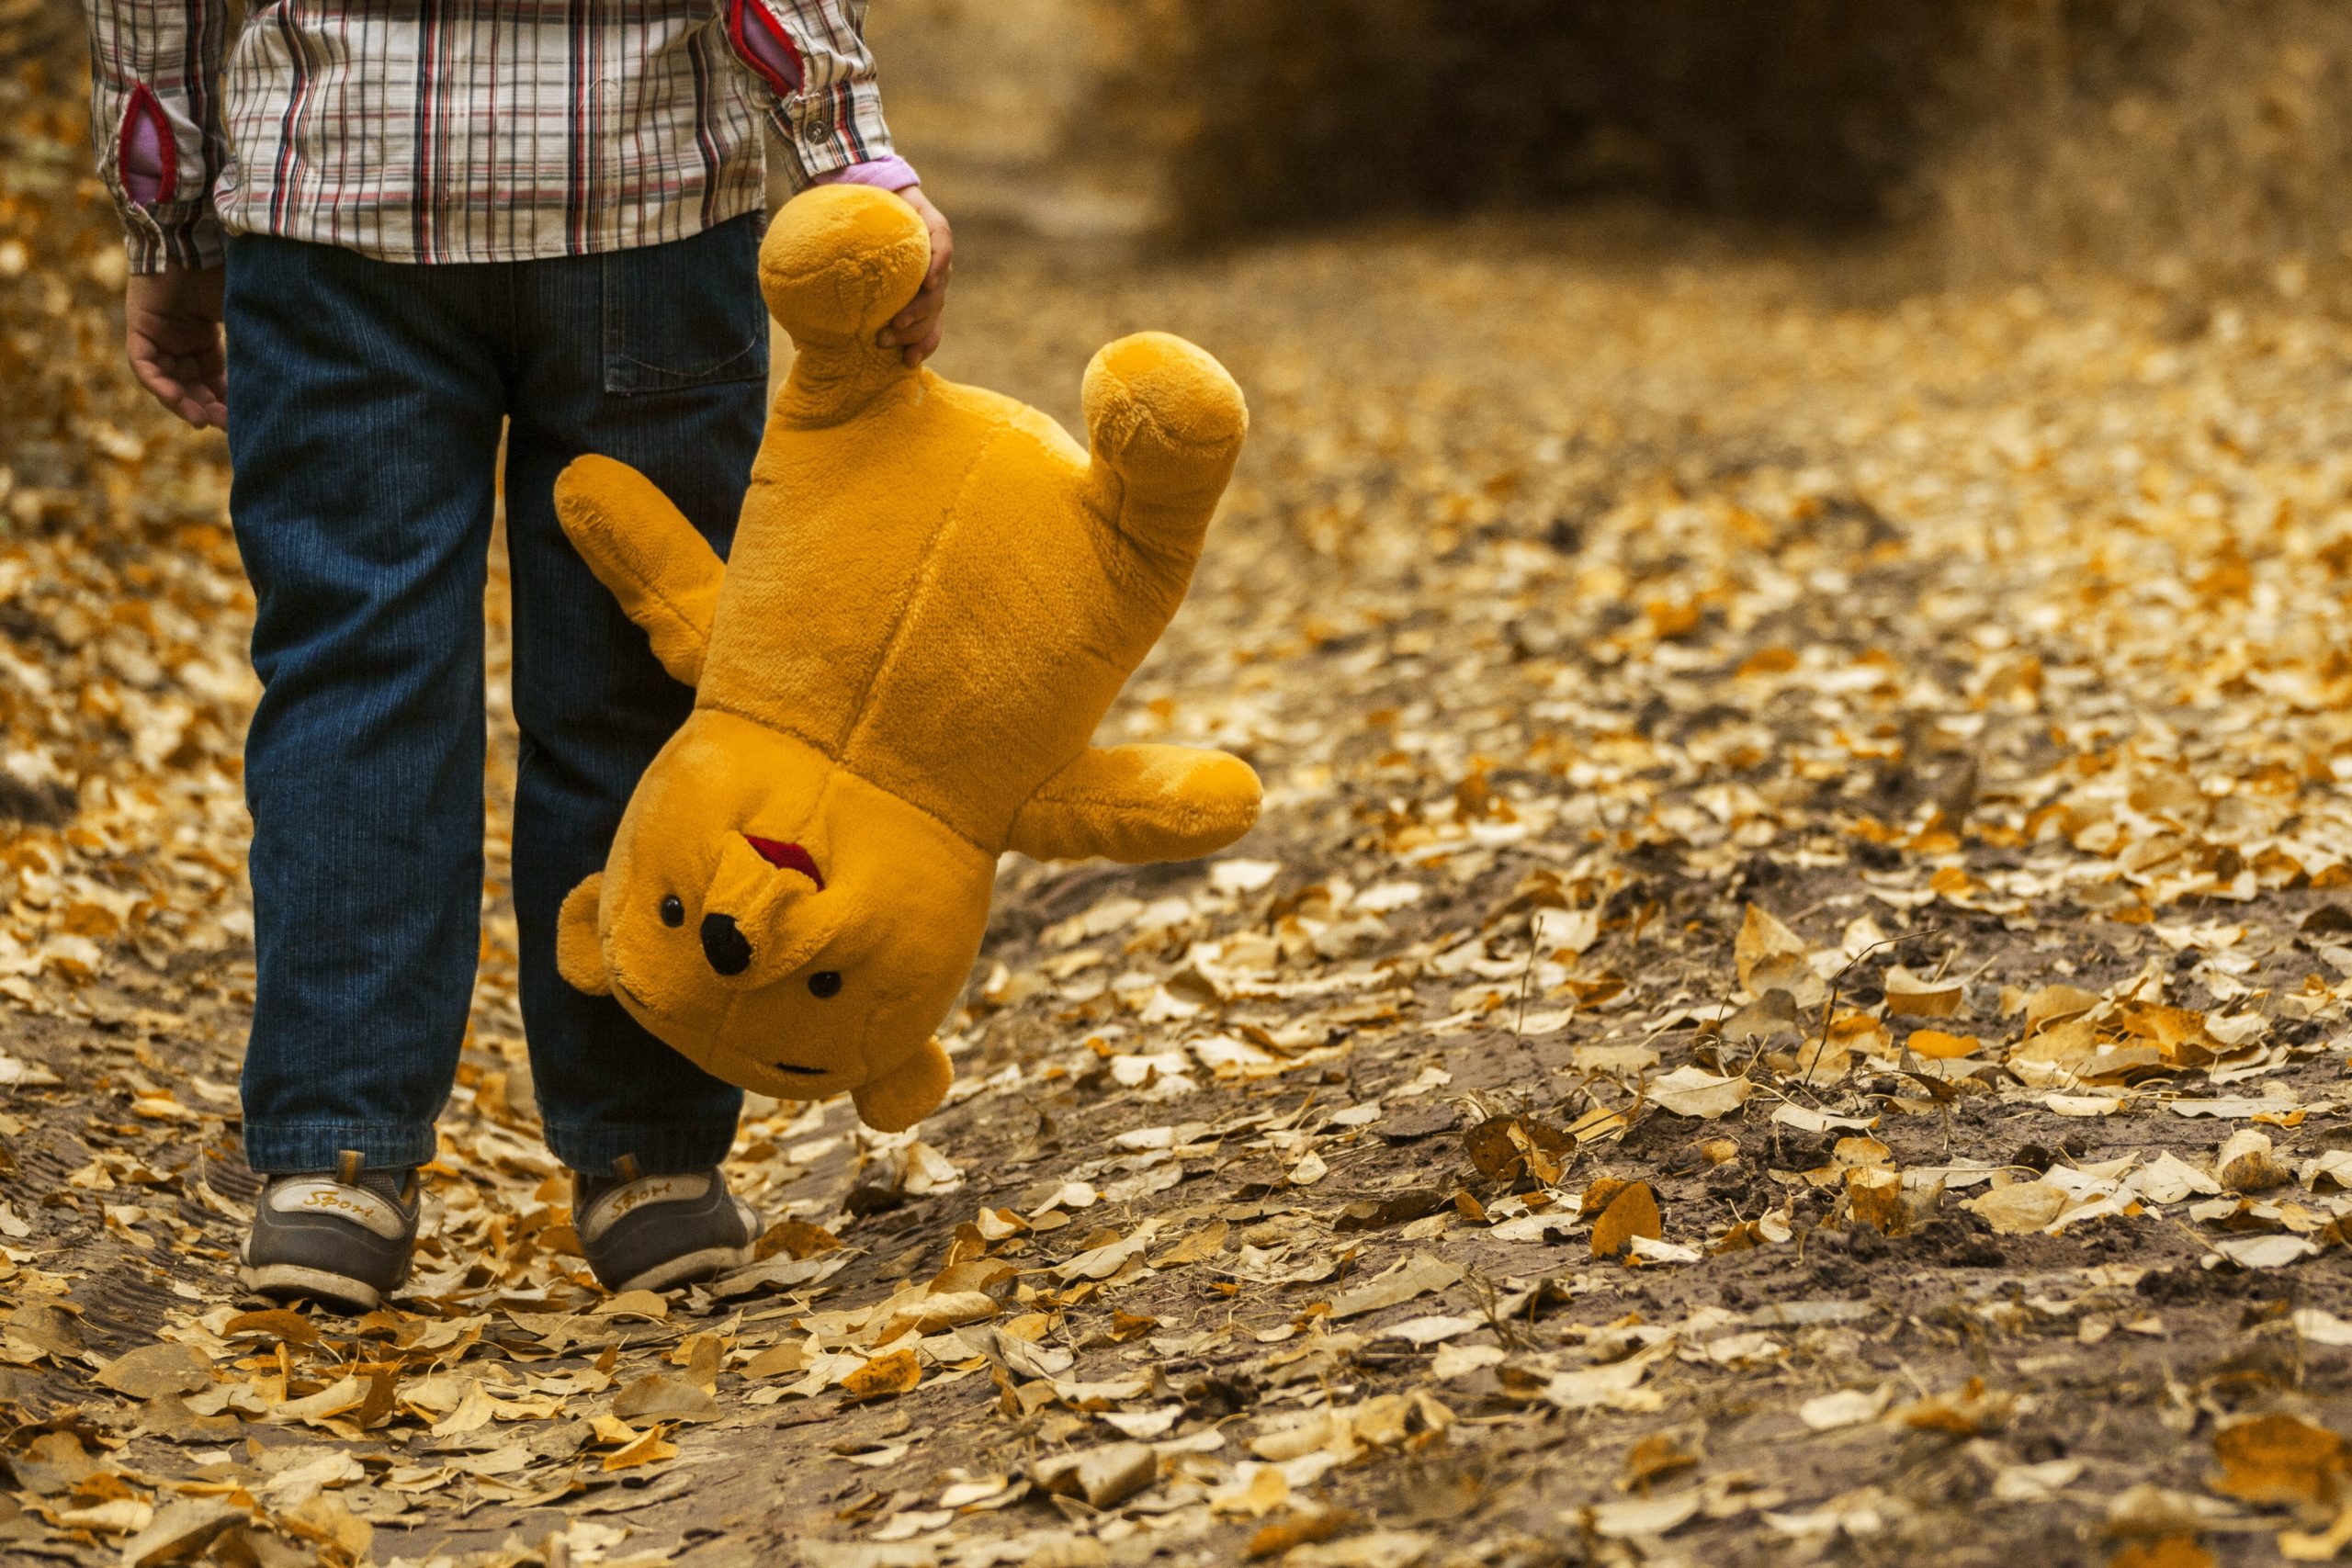 Back of child walking down leafy path carrying a teddy bear in one hand